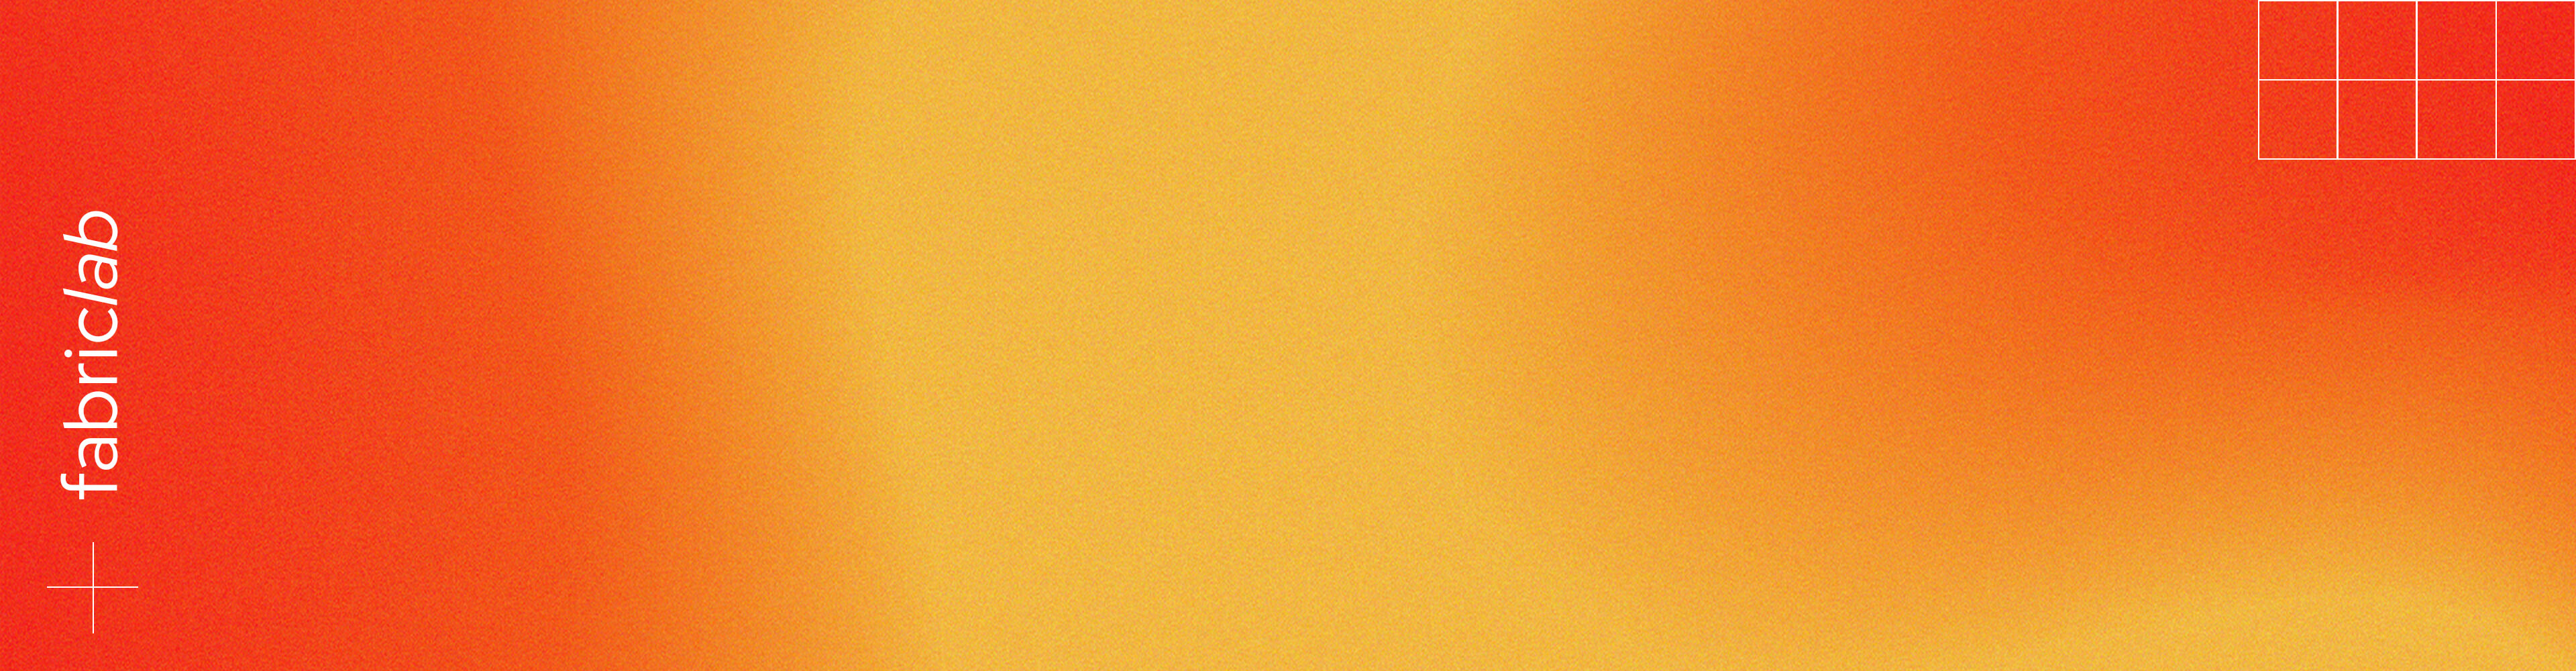 An orange background with a Fabriclab logo on it.